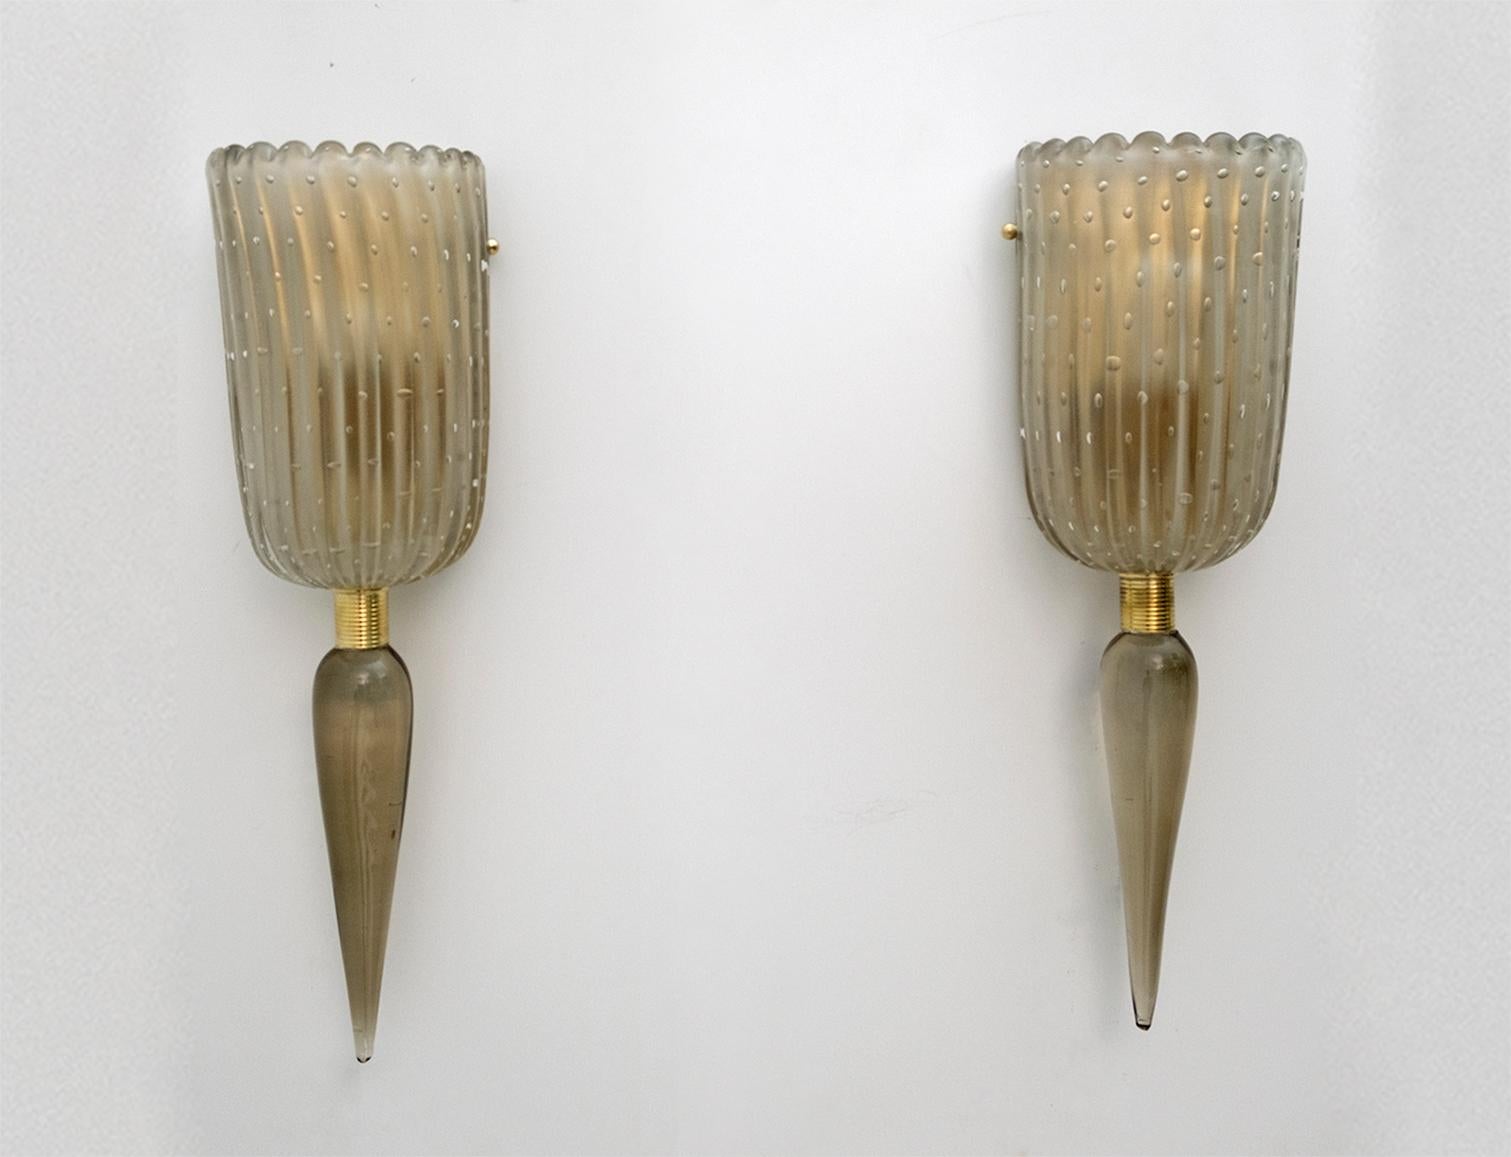 Pair of Mid-Century Modern Murano glass sconces, attributed to Barovier & Toso, Italy, 1980s.
The wall lights have brass supports; Murano glass is worked with the technique of inclusion of air bubbles.
The sconces have one light each and can be